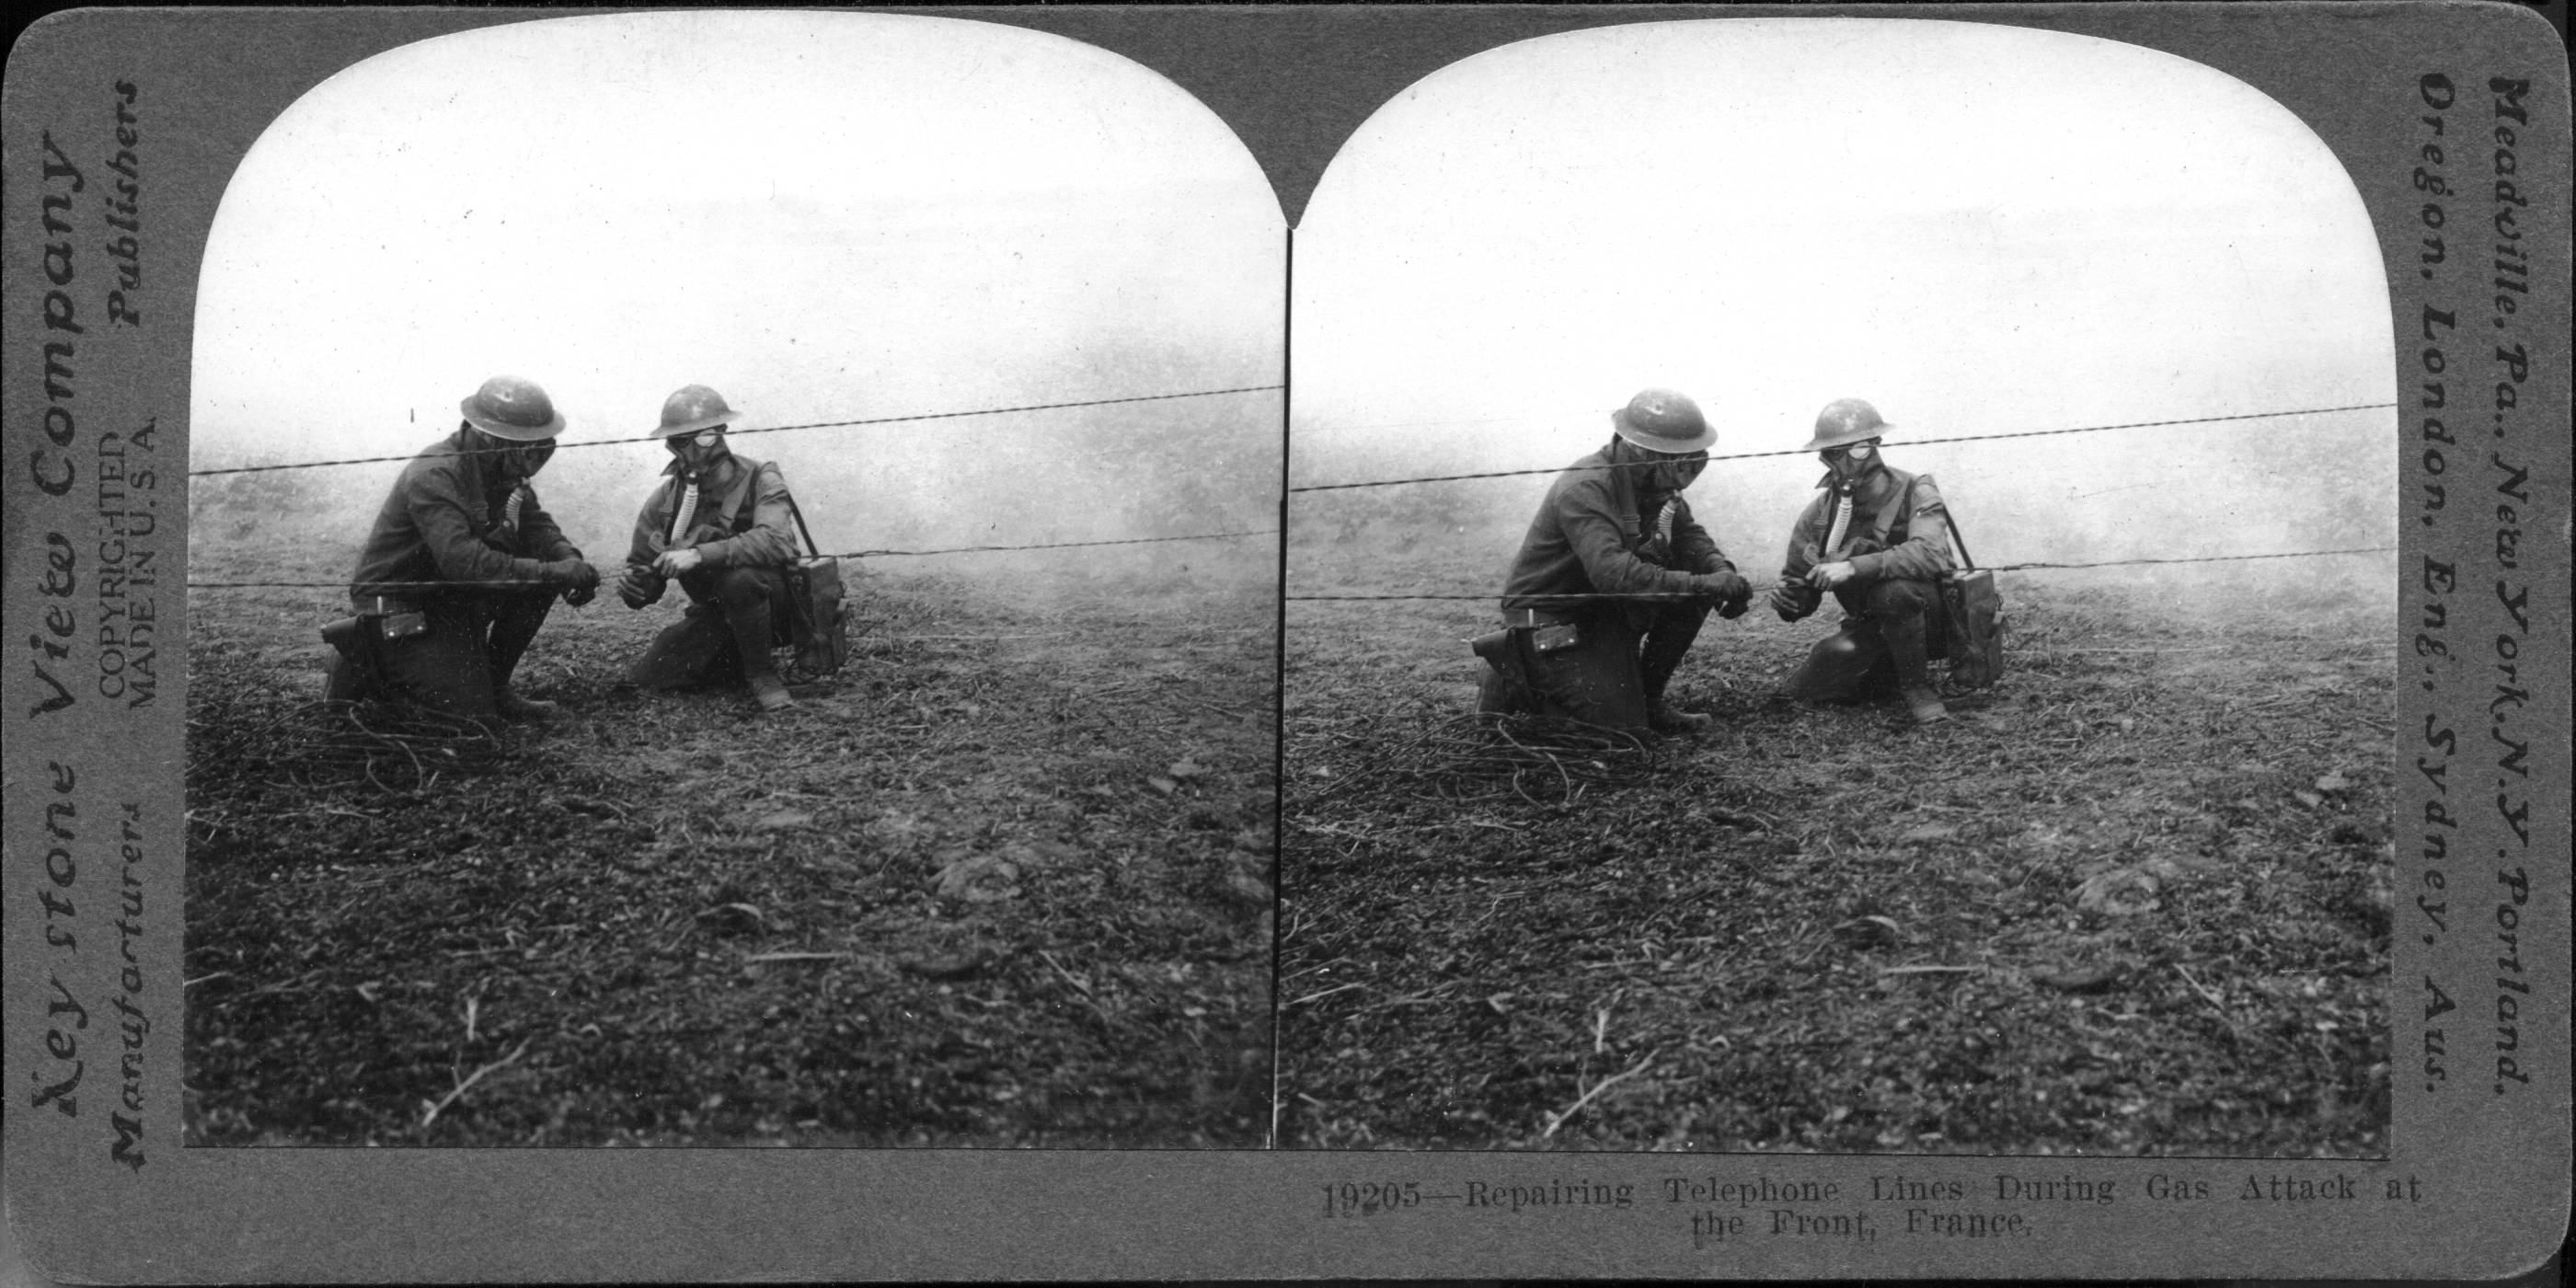 Repairing Telephone Lines During Gas Attack at the Front, France